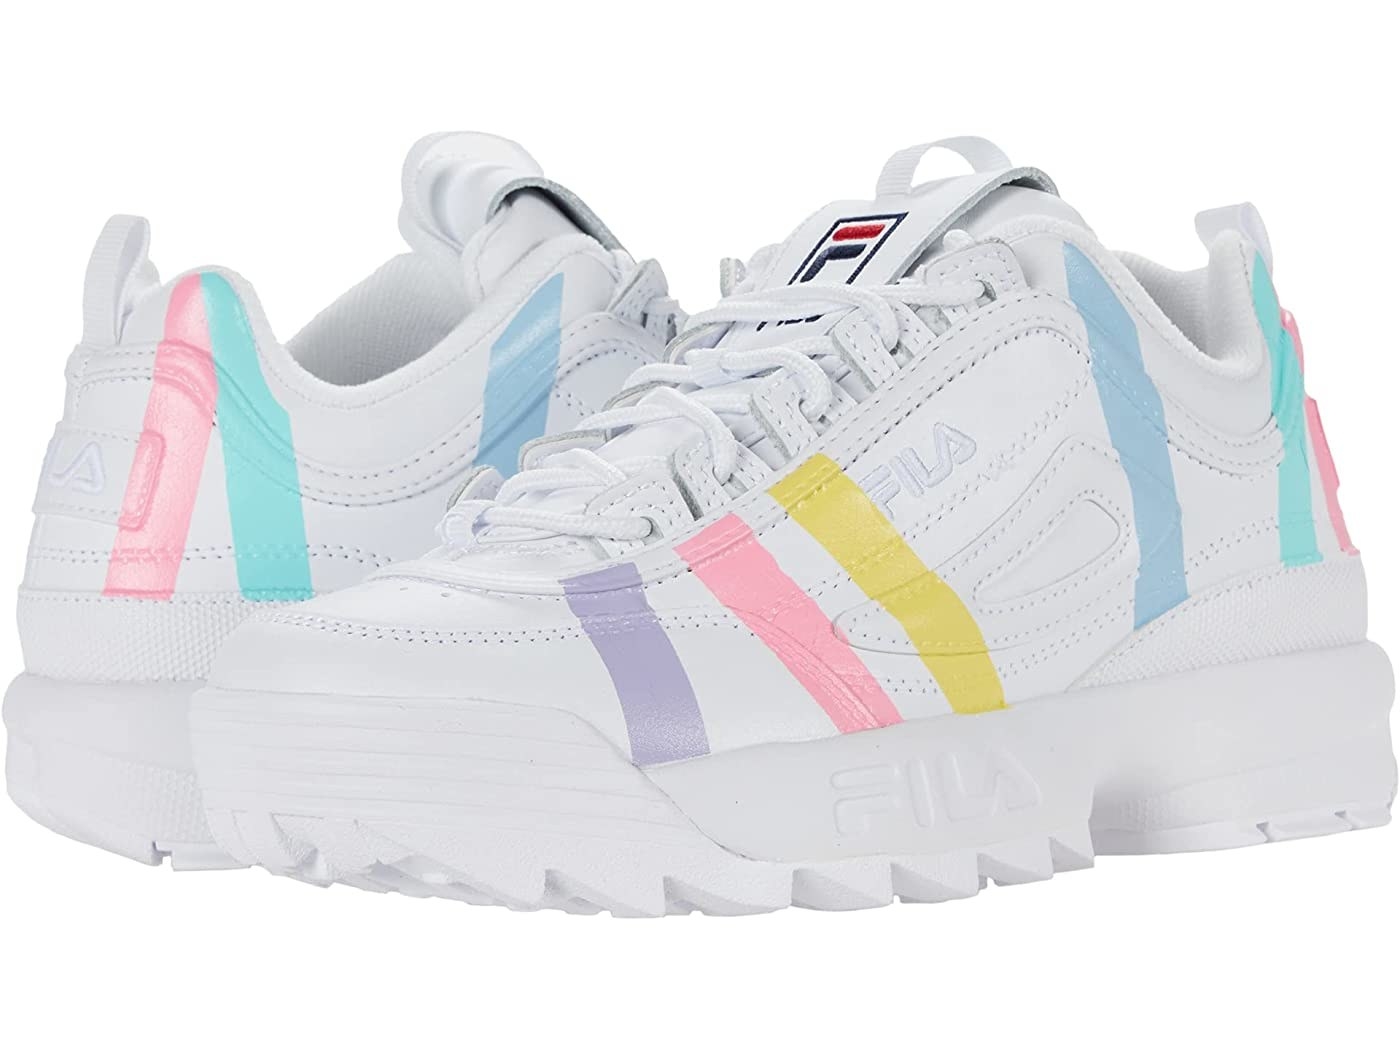 chunky white fila sneakers with pastel stripes on them